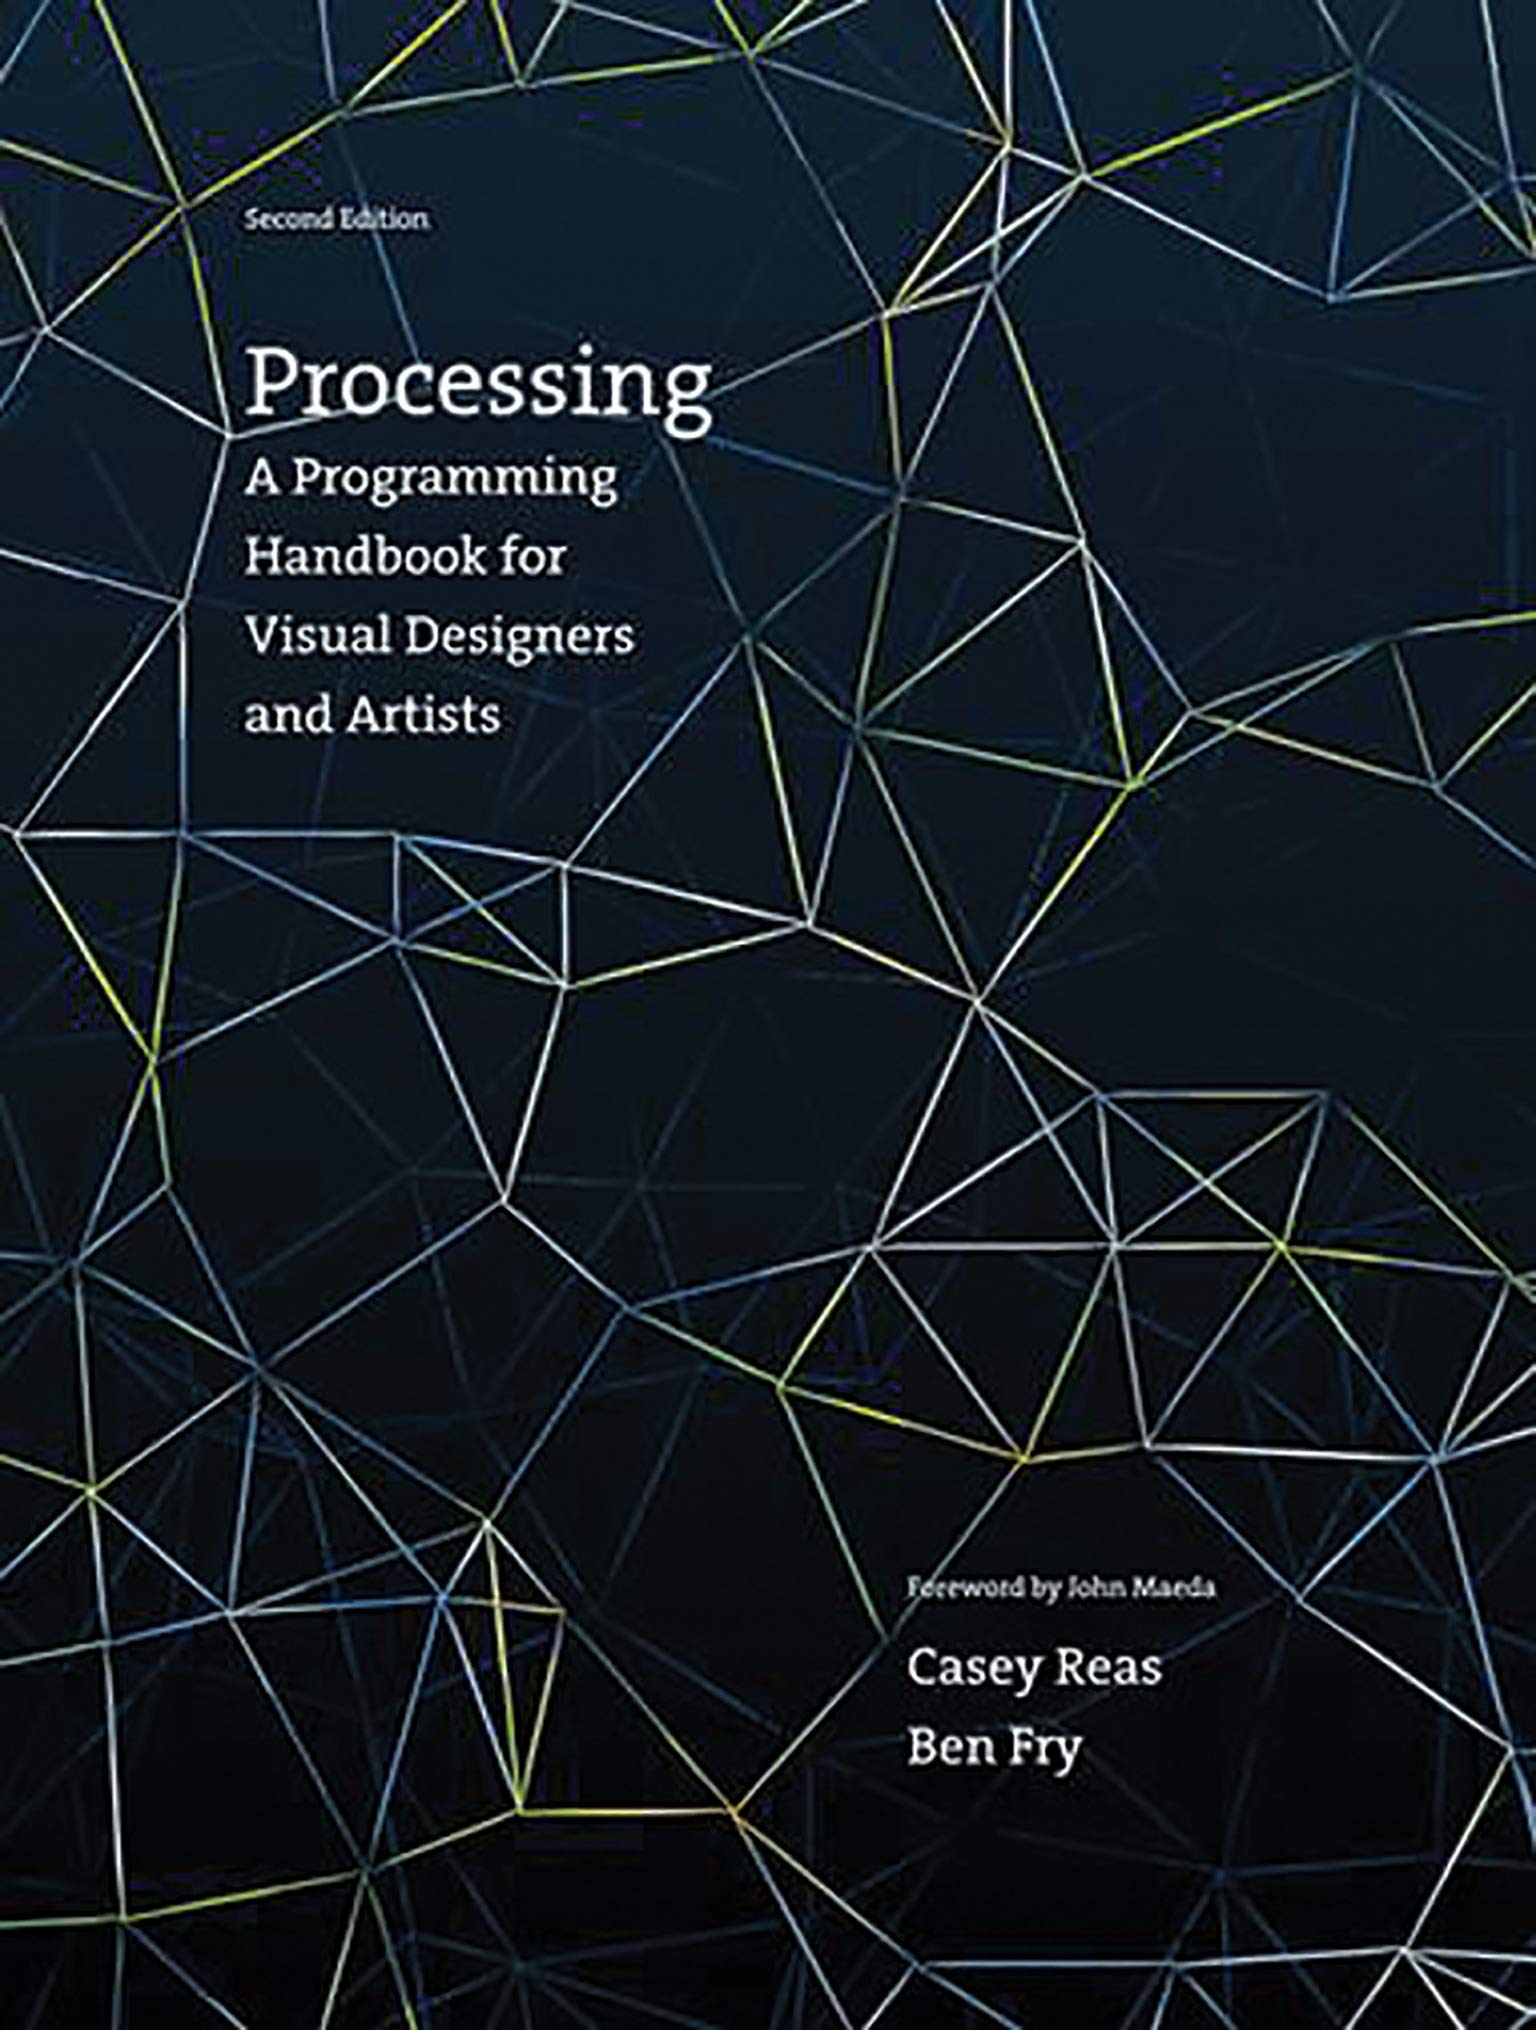 Processing, second edition: A Programming Handbook for Visual Designers and Artists (The MIT Press)